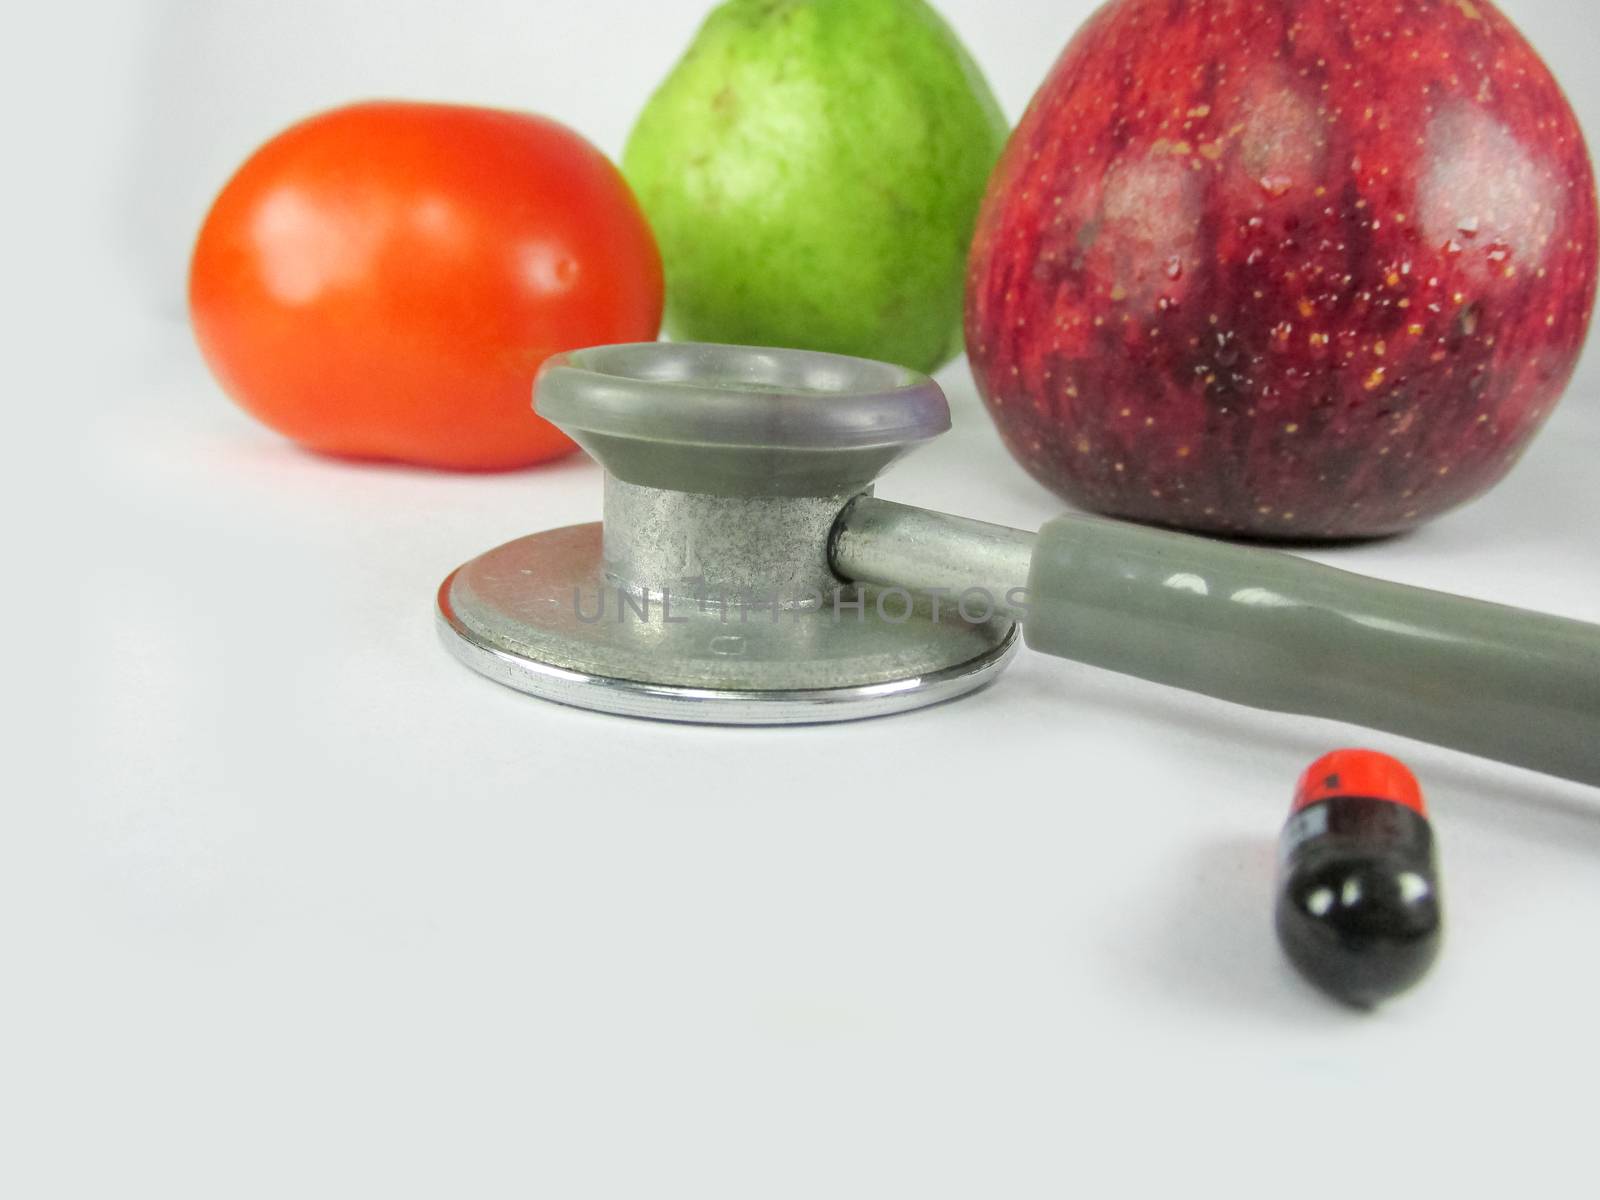  Medicine, doctor and stethoscope,healthy food are the sign of  good health,long life,vitality.